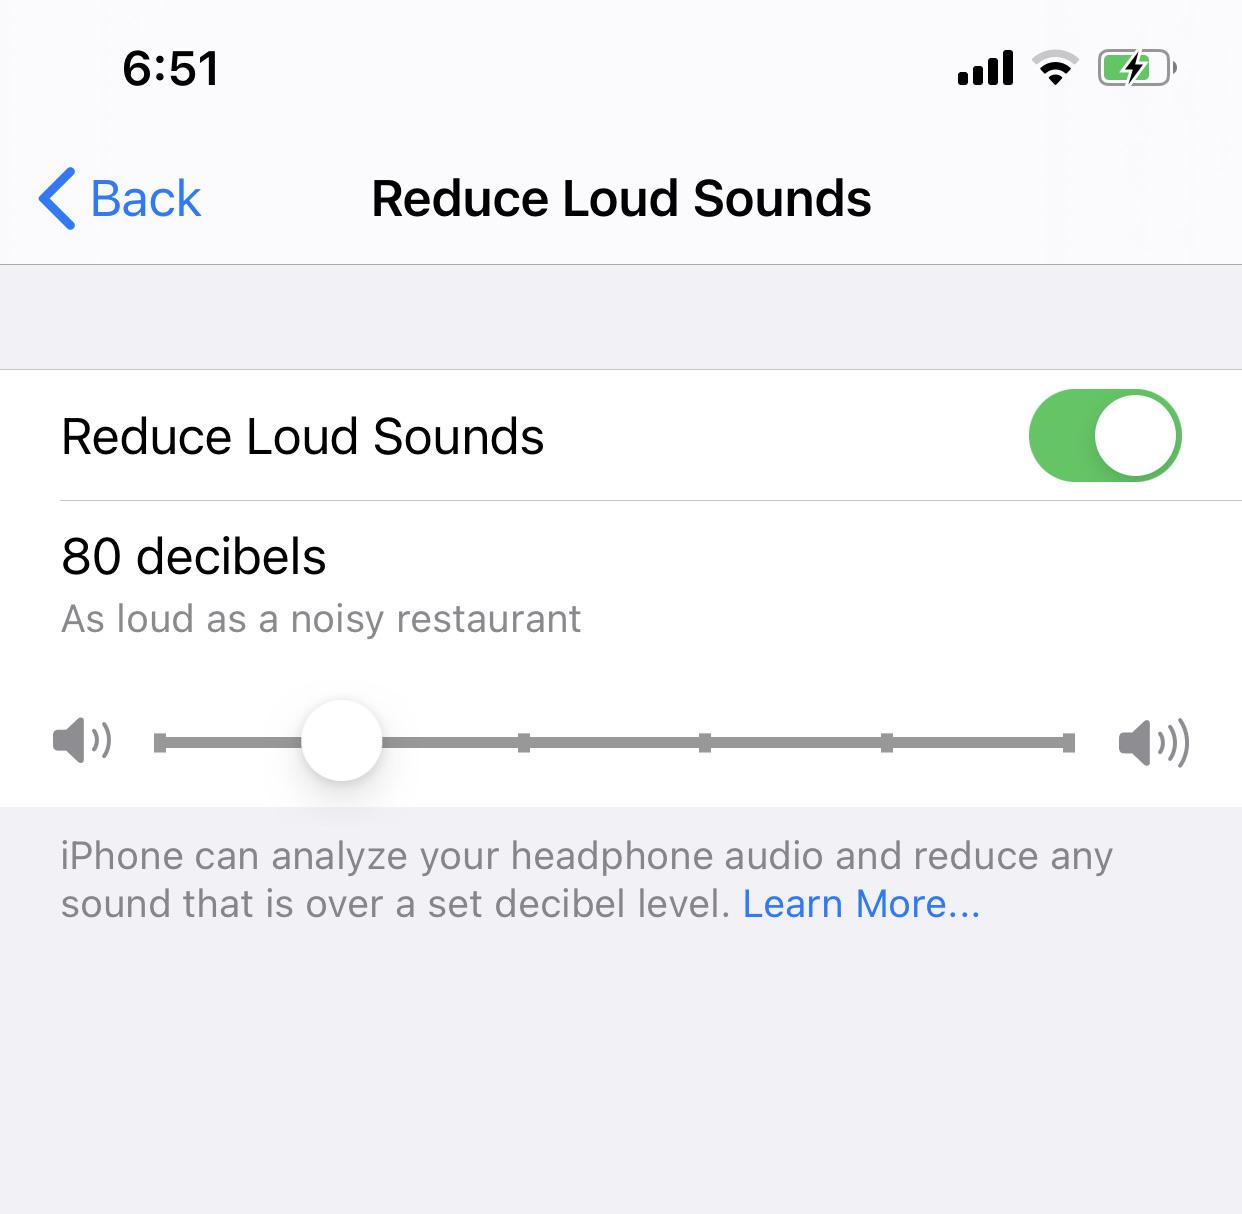 Toggle next to the Reduce Loud Sounds 